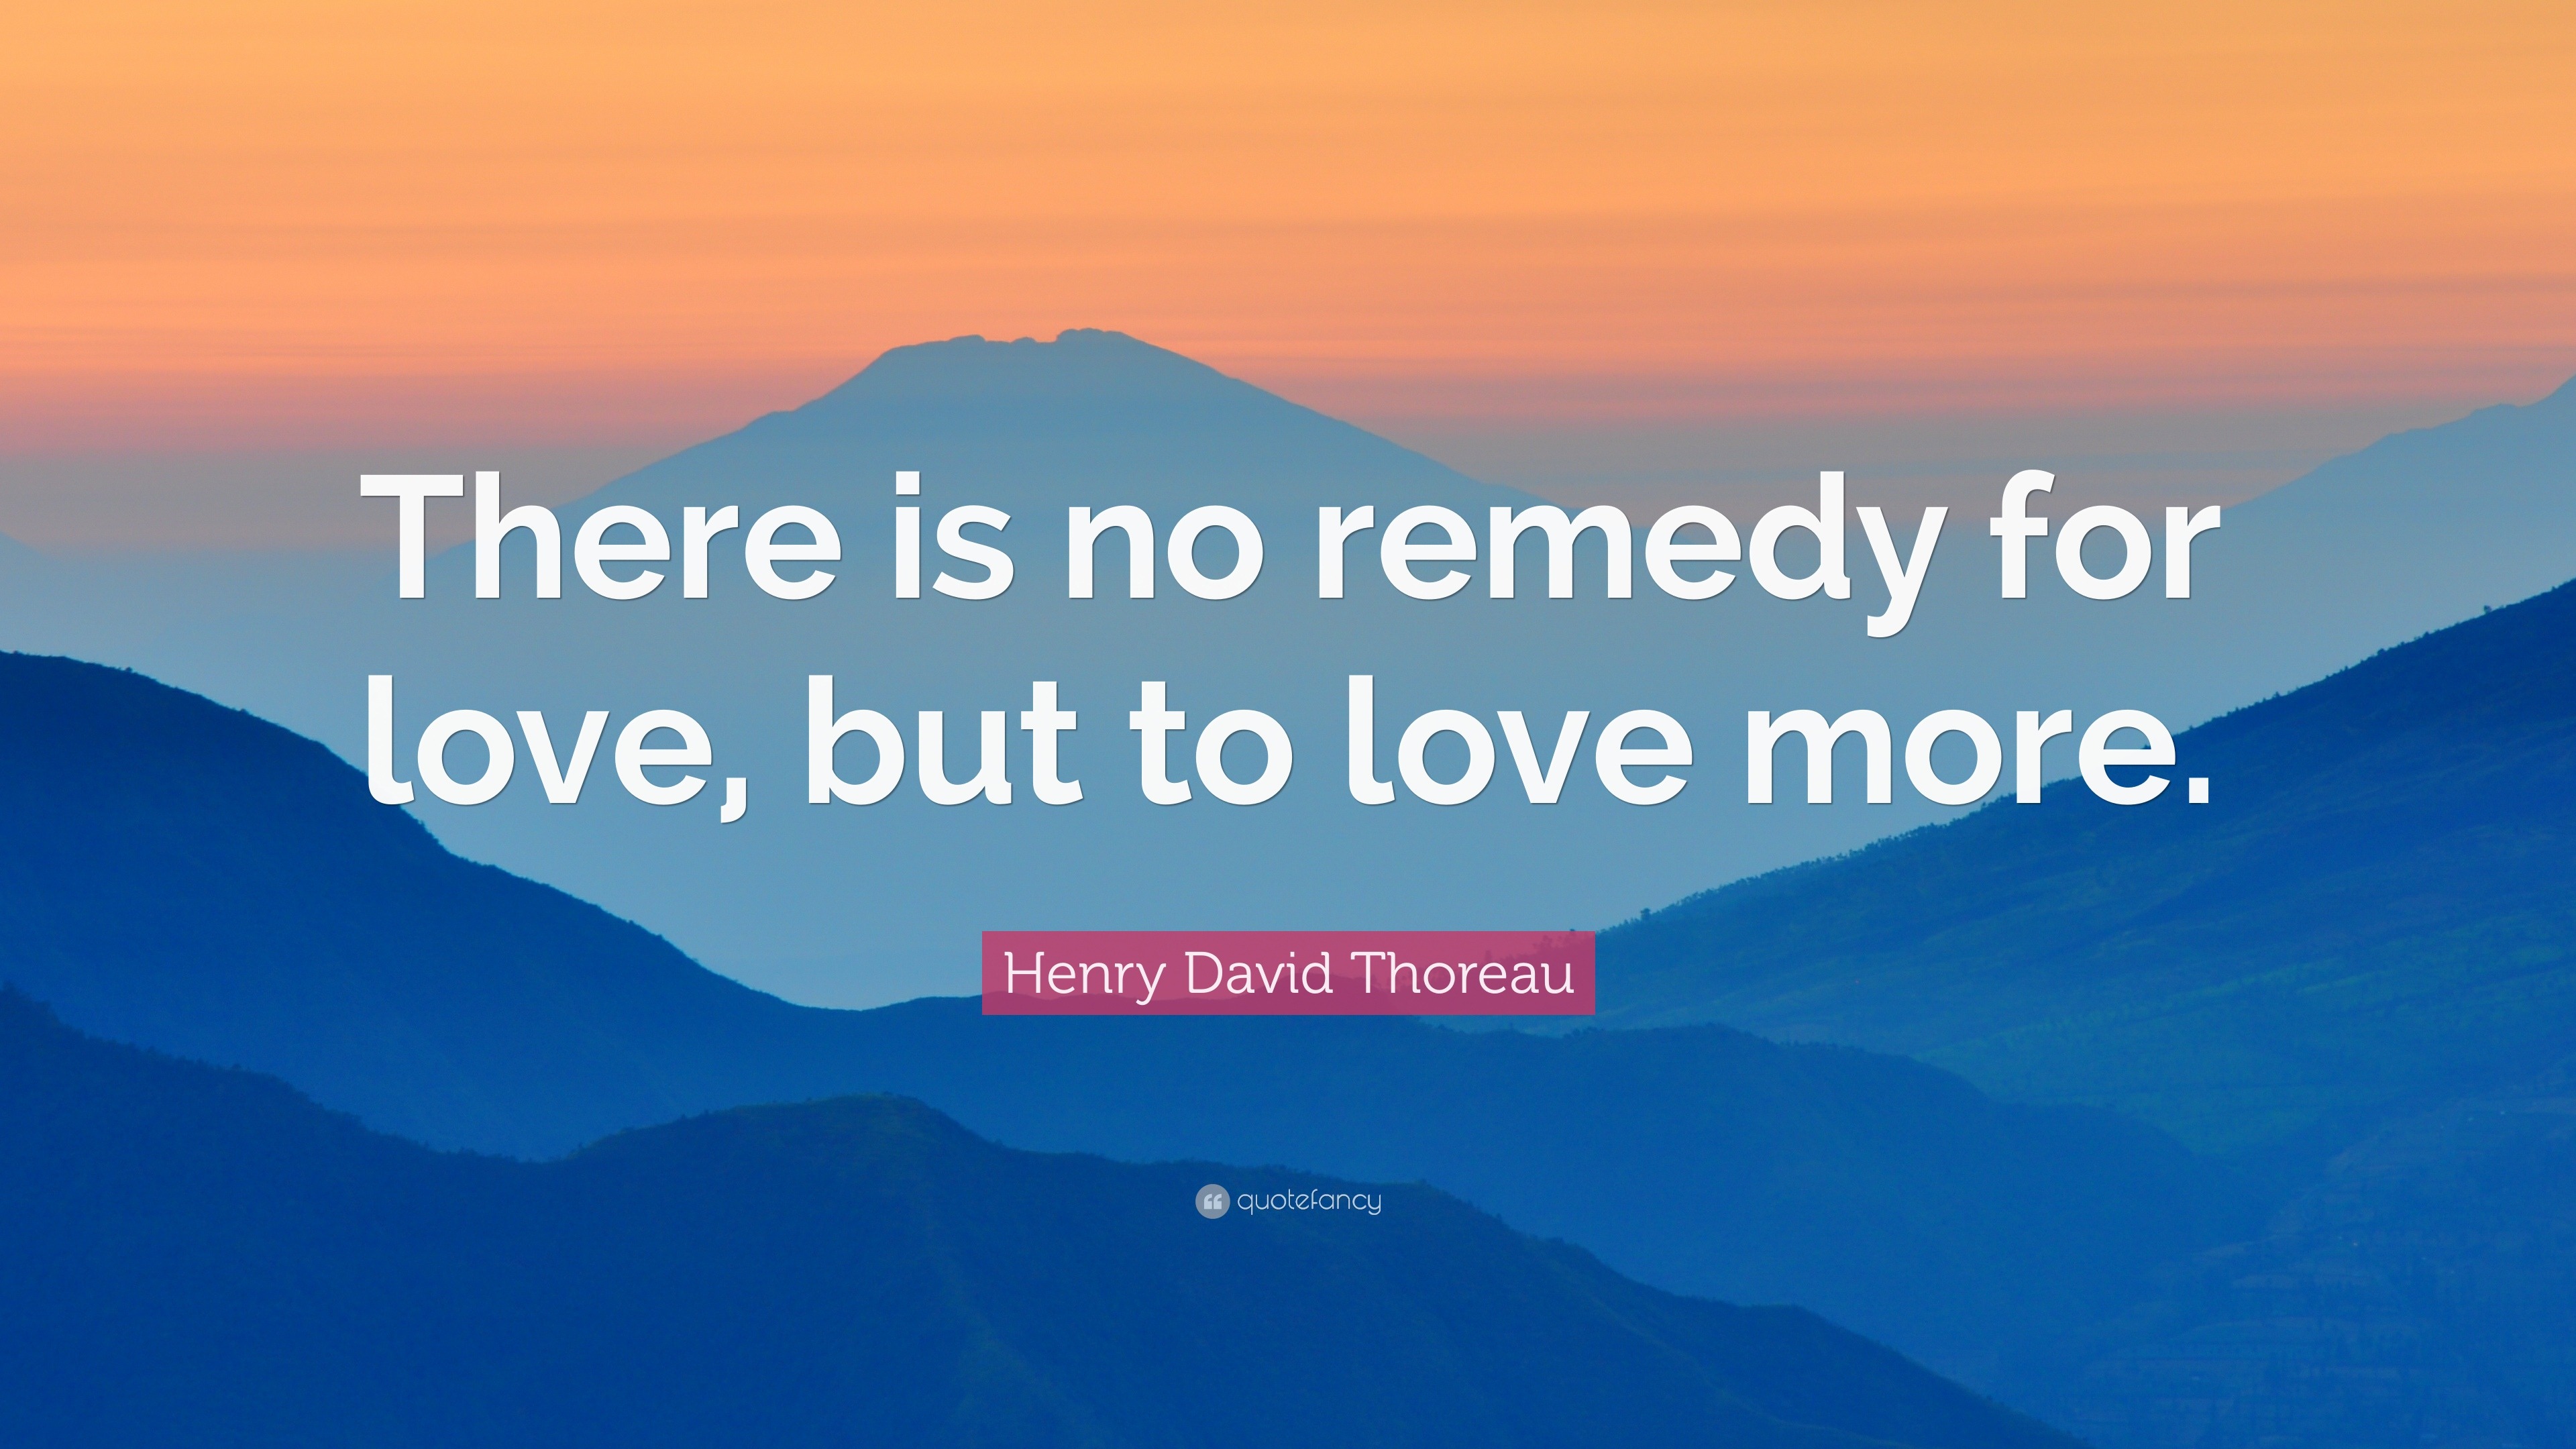 Henry David Thoreau Quote: “There is no remedy for love, but to love